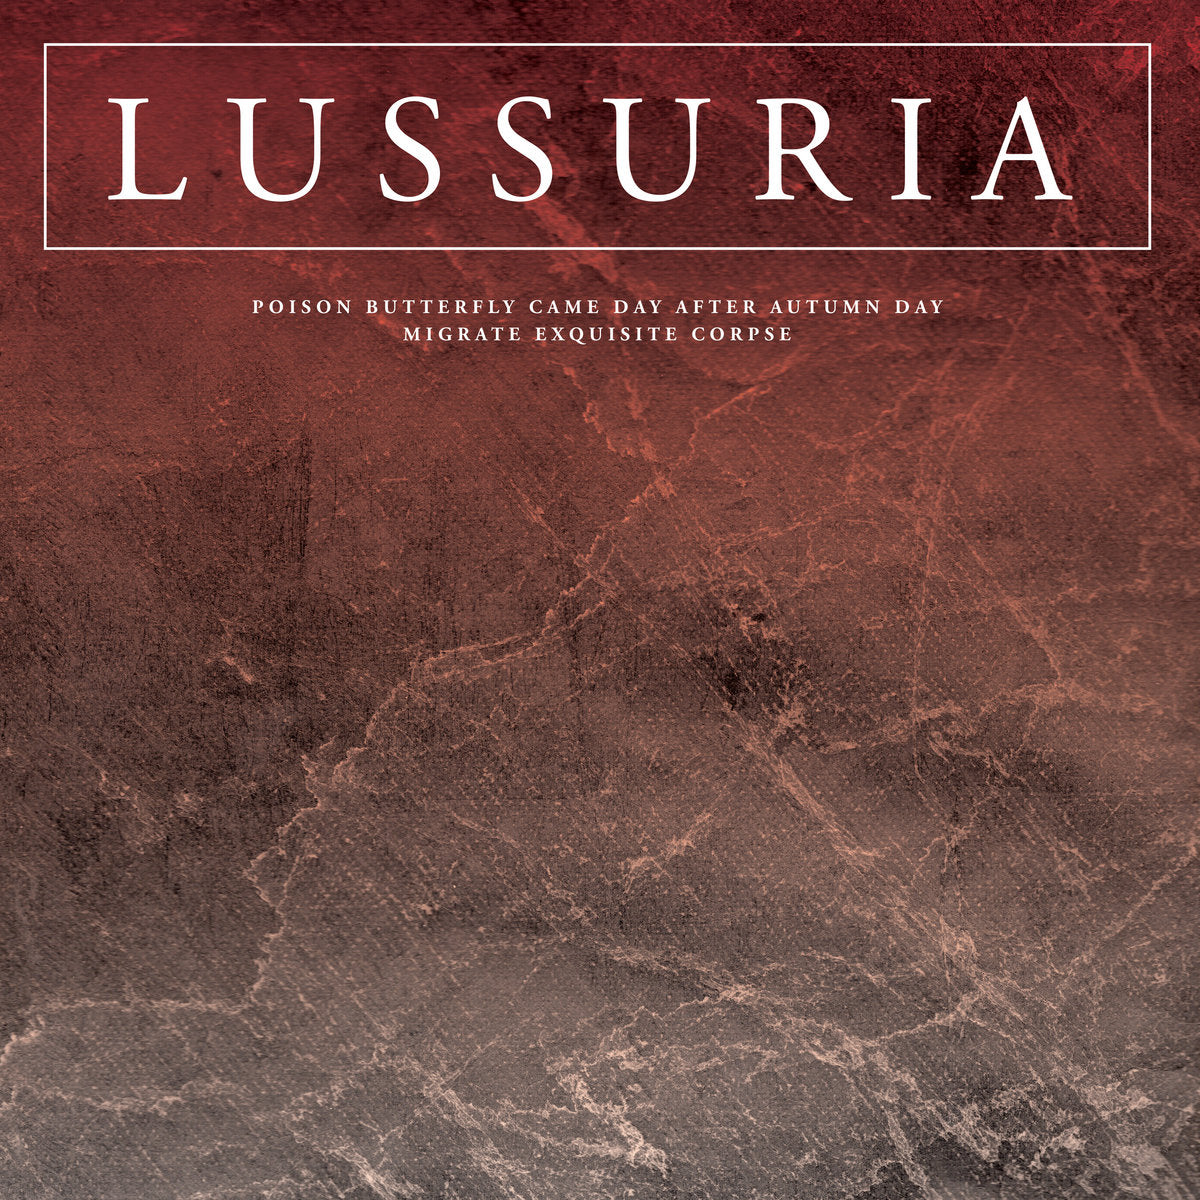 Lussuria - Poison Butterfly Came Day After Autumn Day/Migrate Exquisite Corpse 2LP